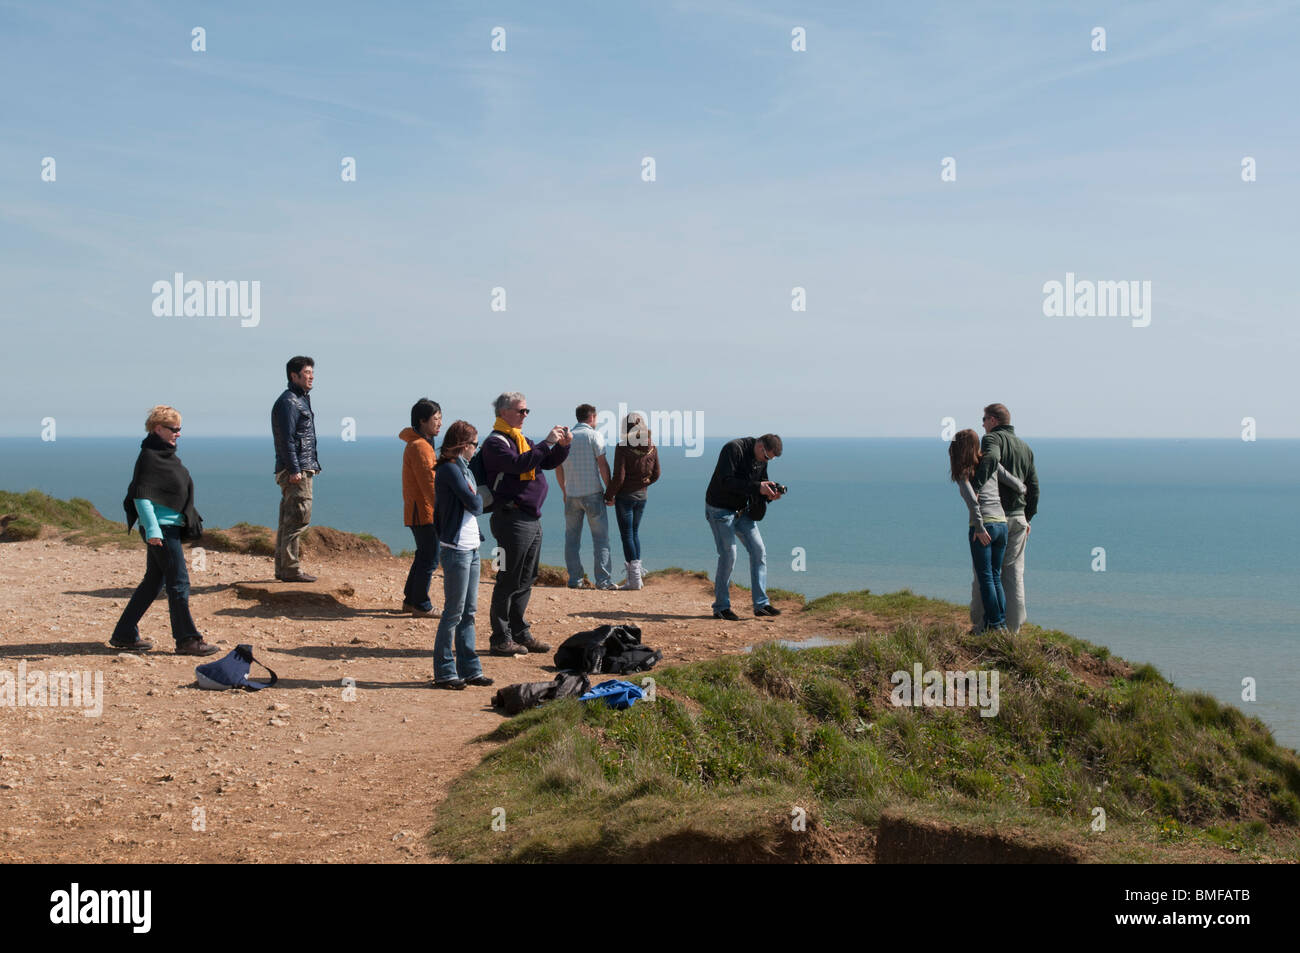 Visitors to Beachy Head take photographs at the cliff edge. EDITORIAL USE ONLY. Stock Photo